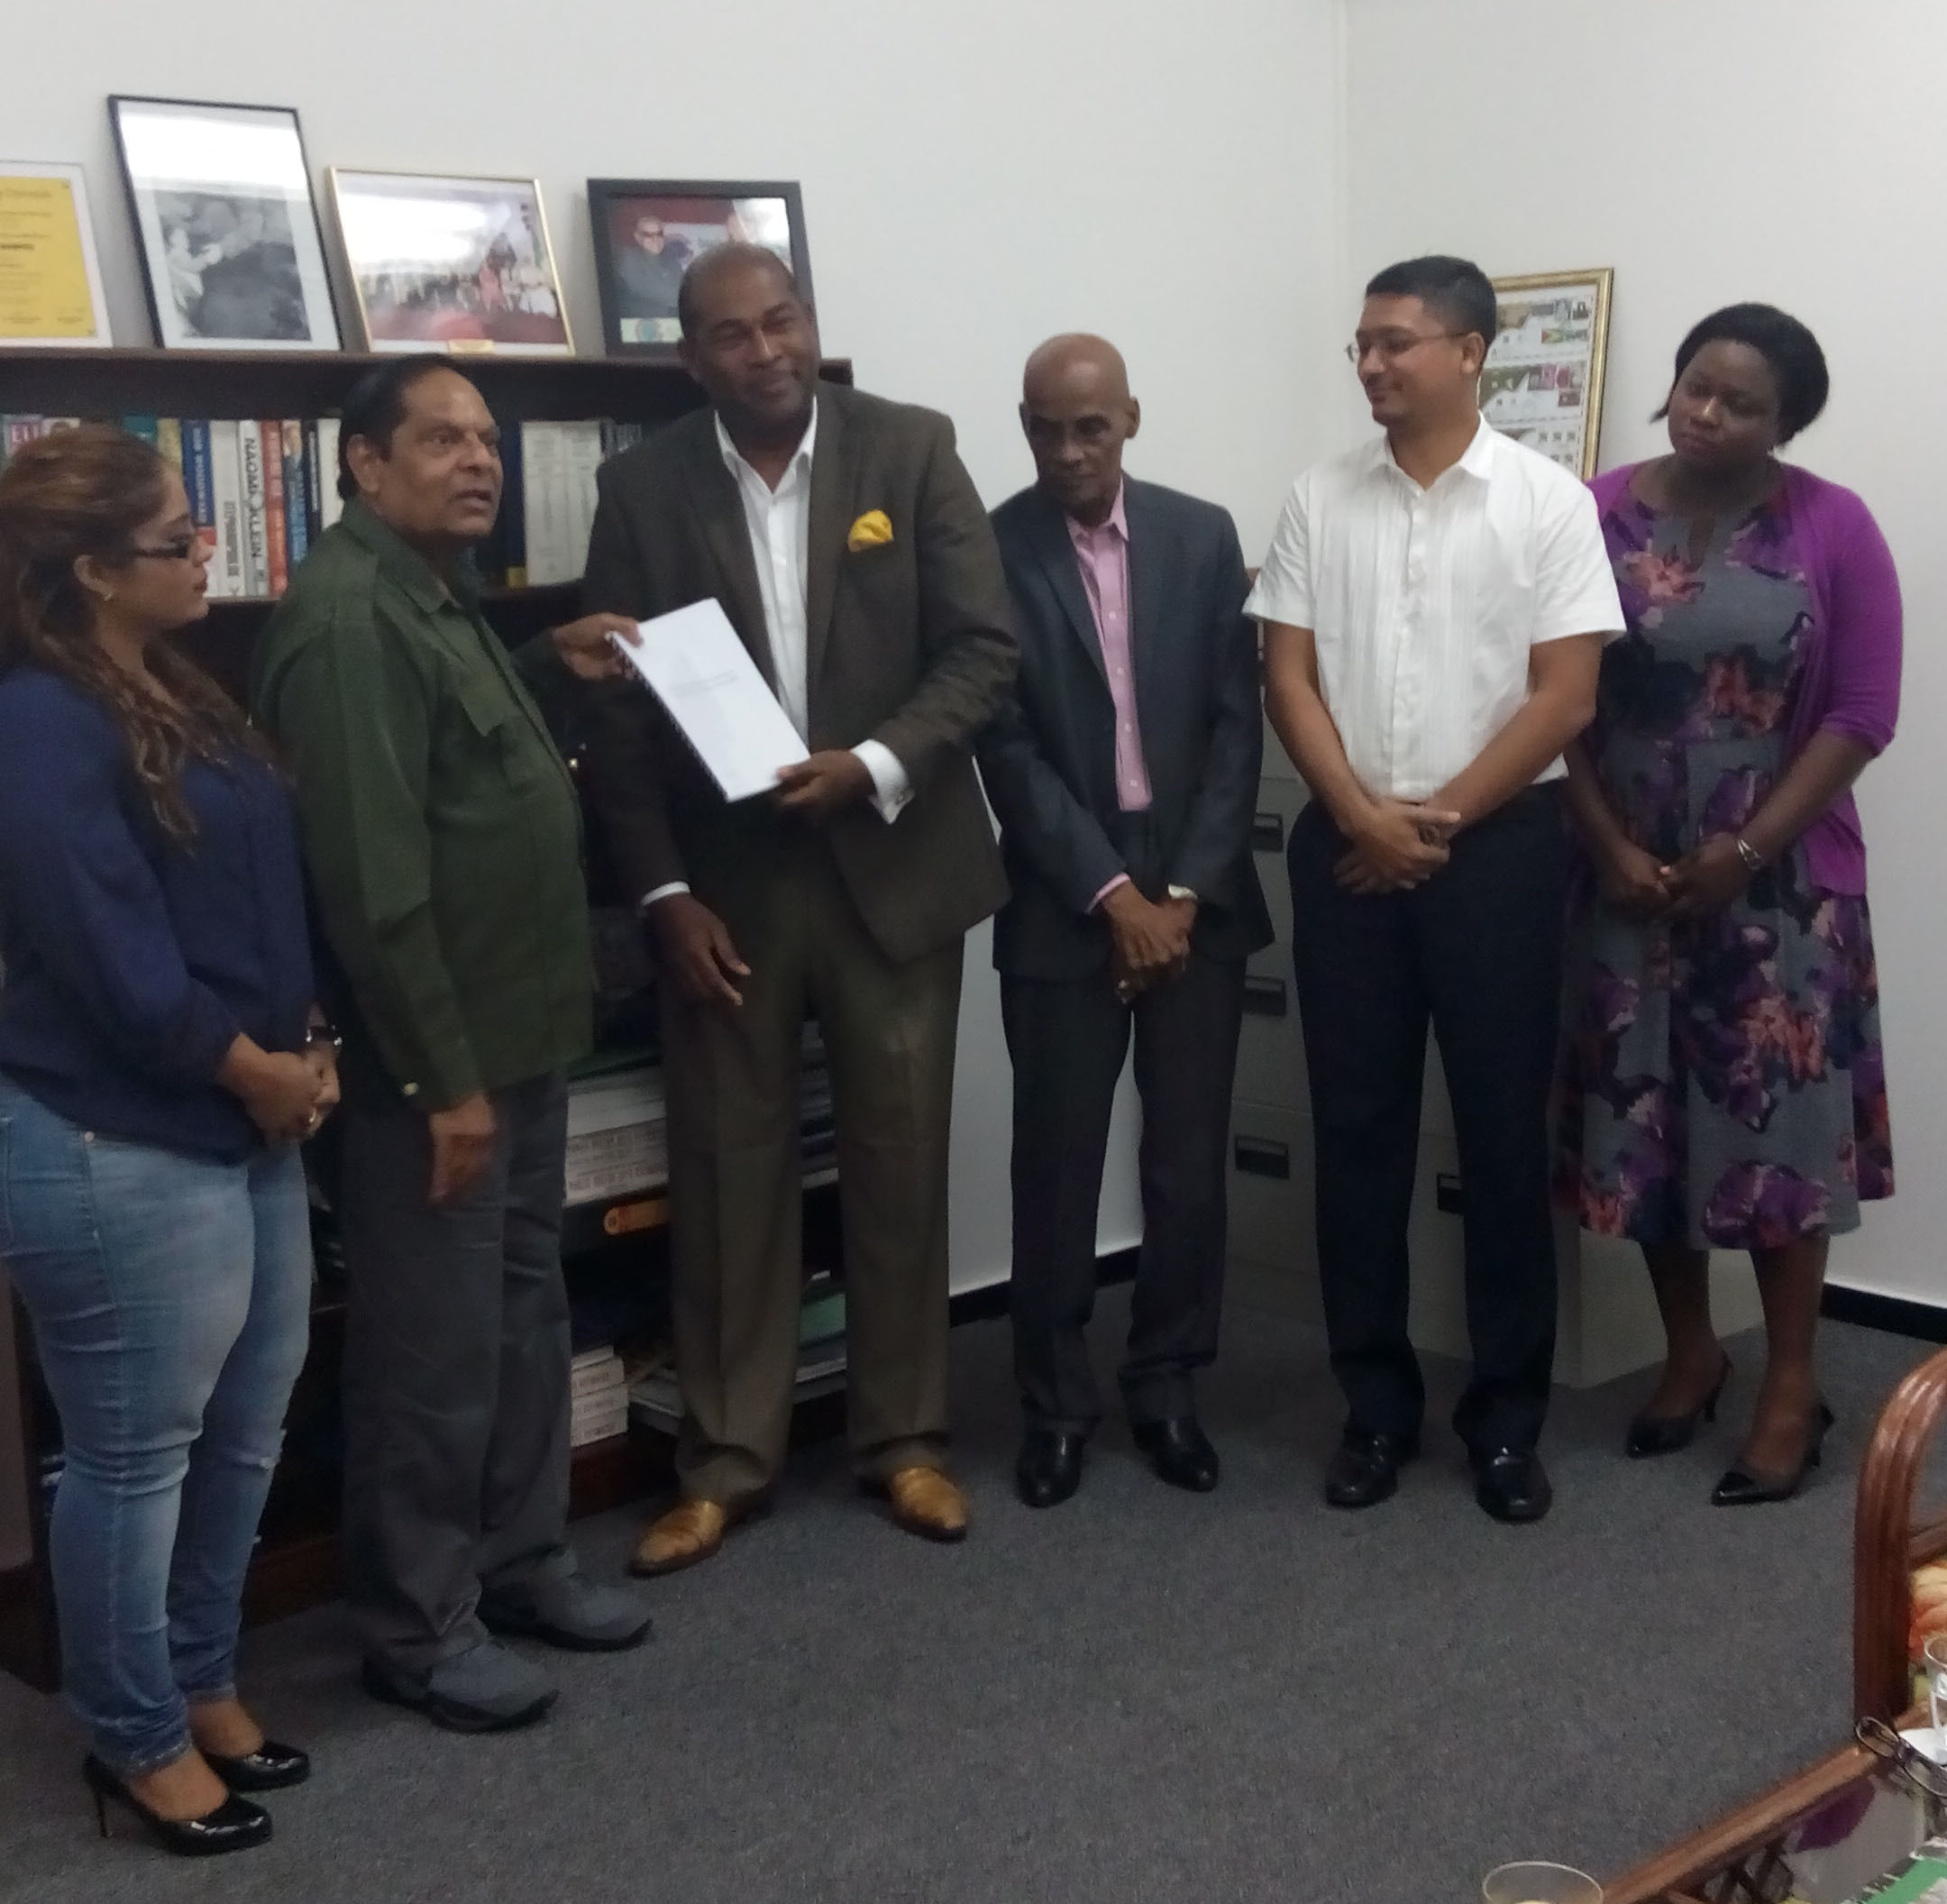 Prime Minister Moses Nagamootoo receives the final report from Convenor Nigel Hughes in the presence of from left: Geeta Chandan-Edmond, Professor Duke Pollard, Gino Persaud and Tamara Khan. Chandan-Edmond and Persaud are members of the Steering Committee while the others would have provided support. 